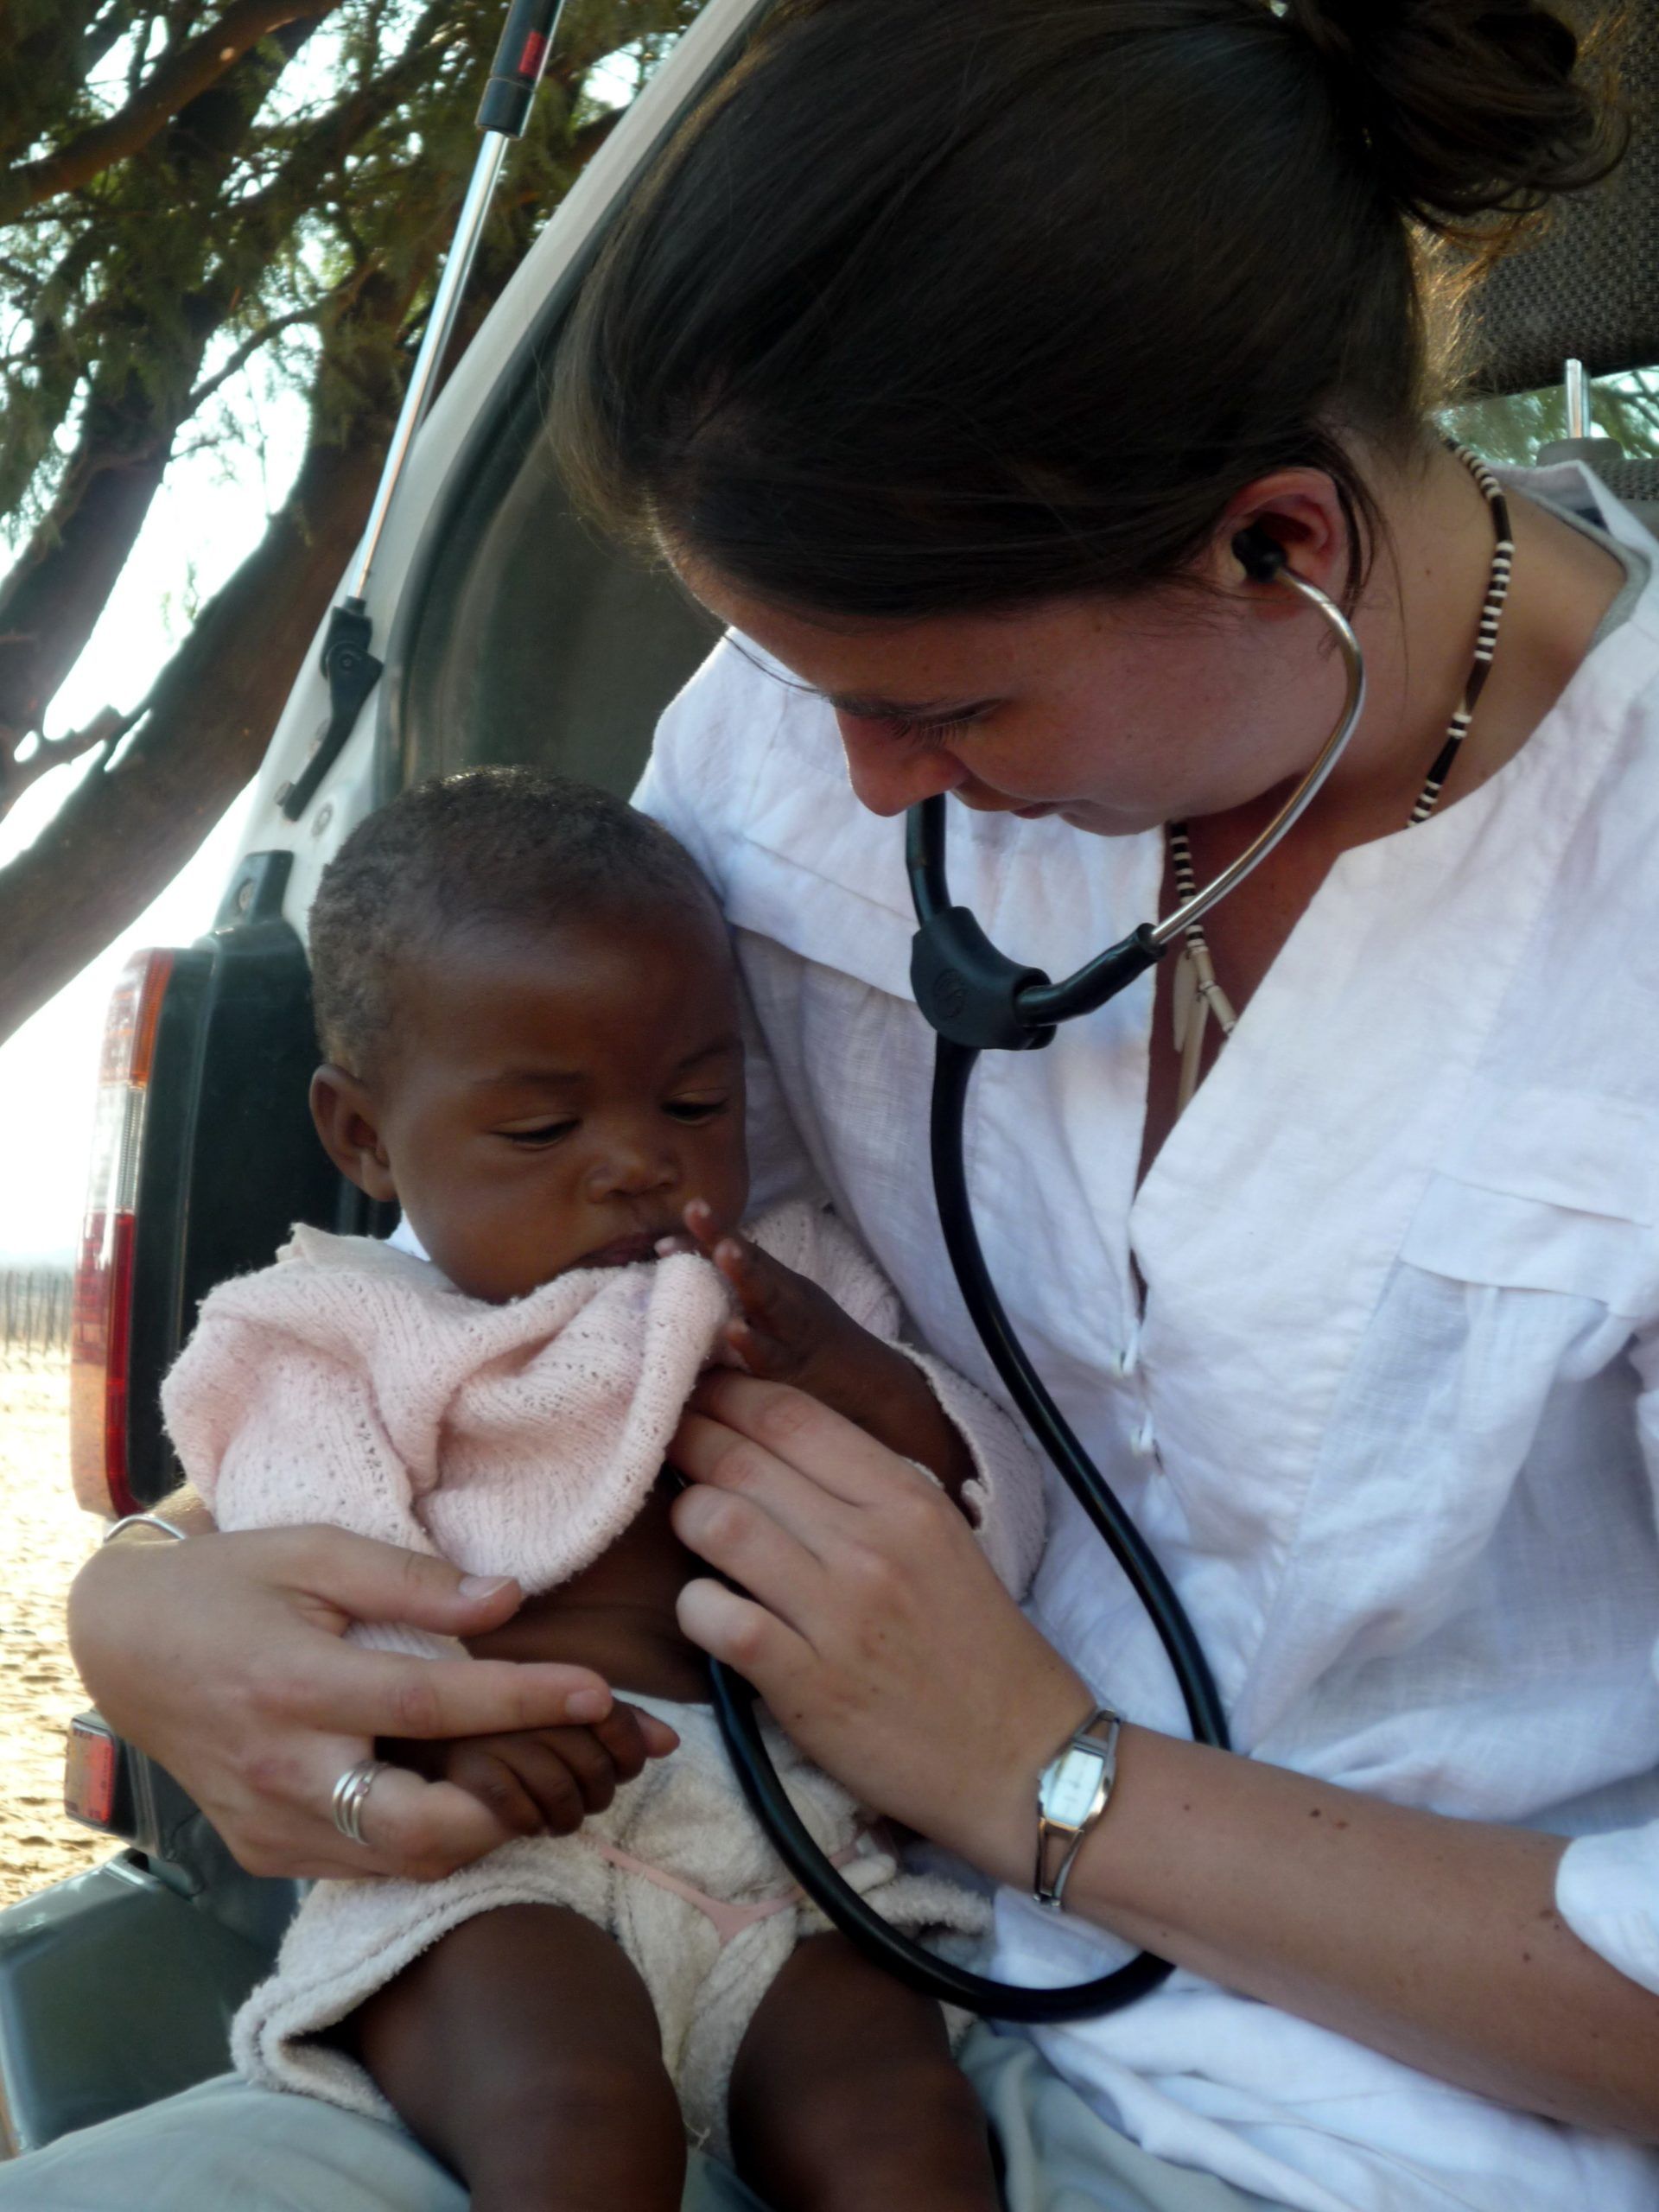 Hundreds are finding more than physical healing through Medical Missions Outreach -they find healing for their souls in the Great Physician.